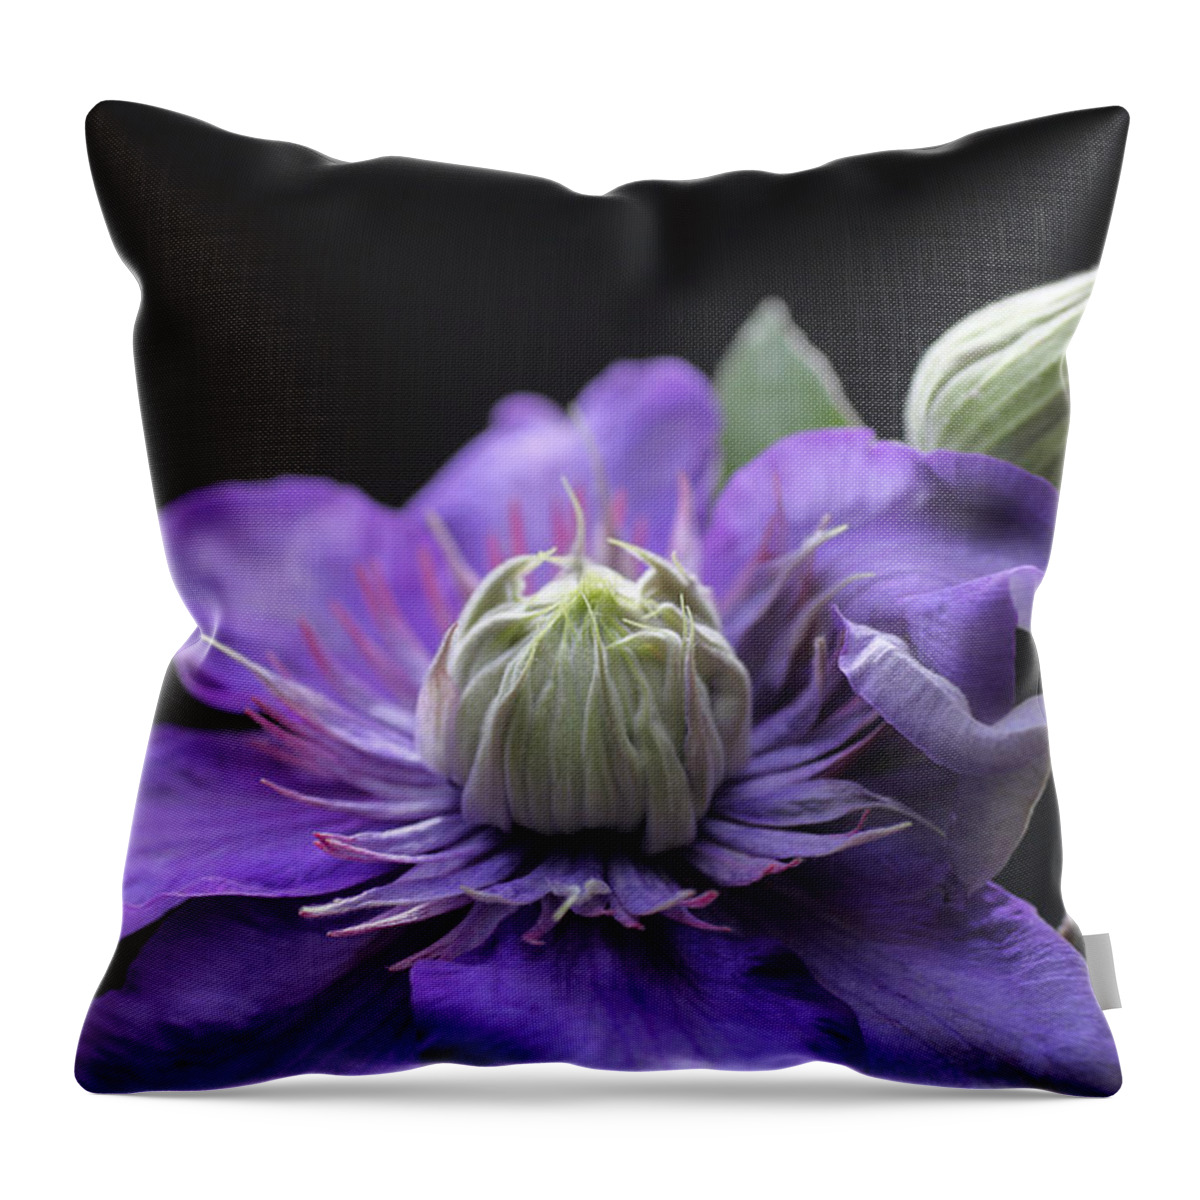 Abundant Throw Pillow featuring the photograph Abundant Clematis by Tammy Pool